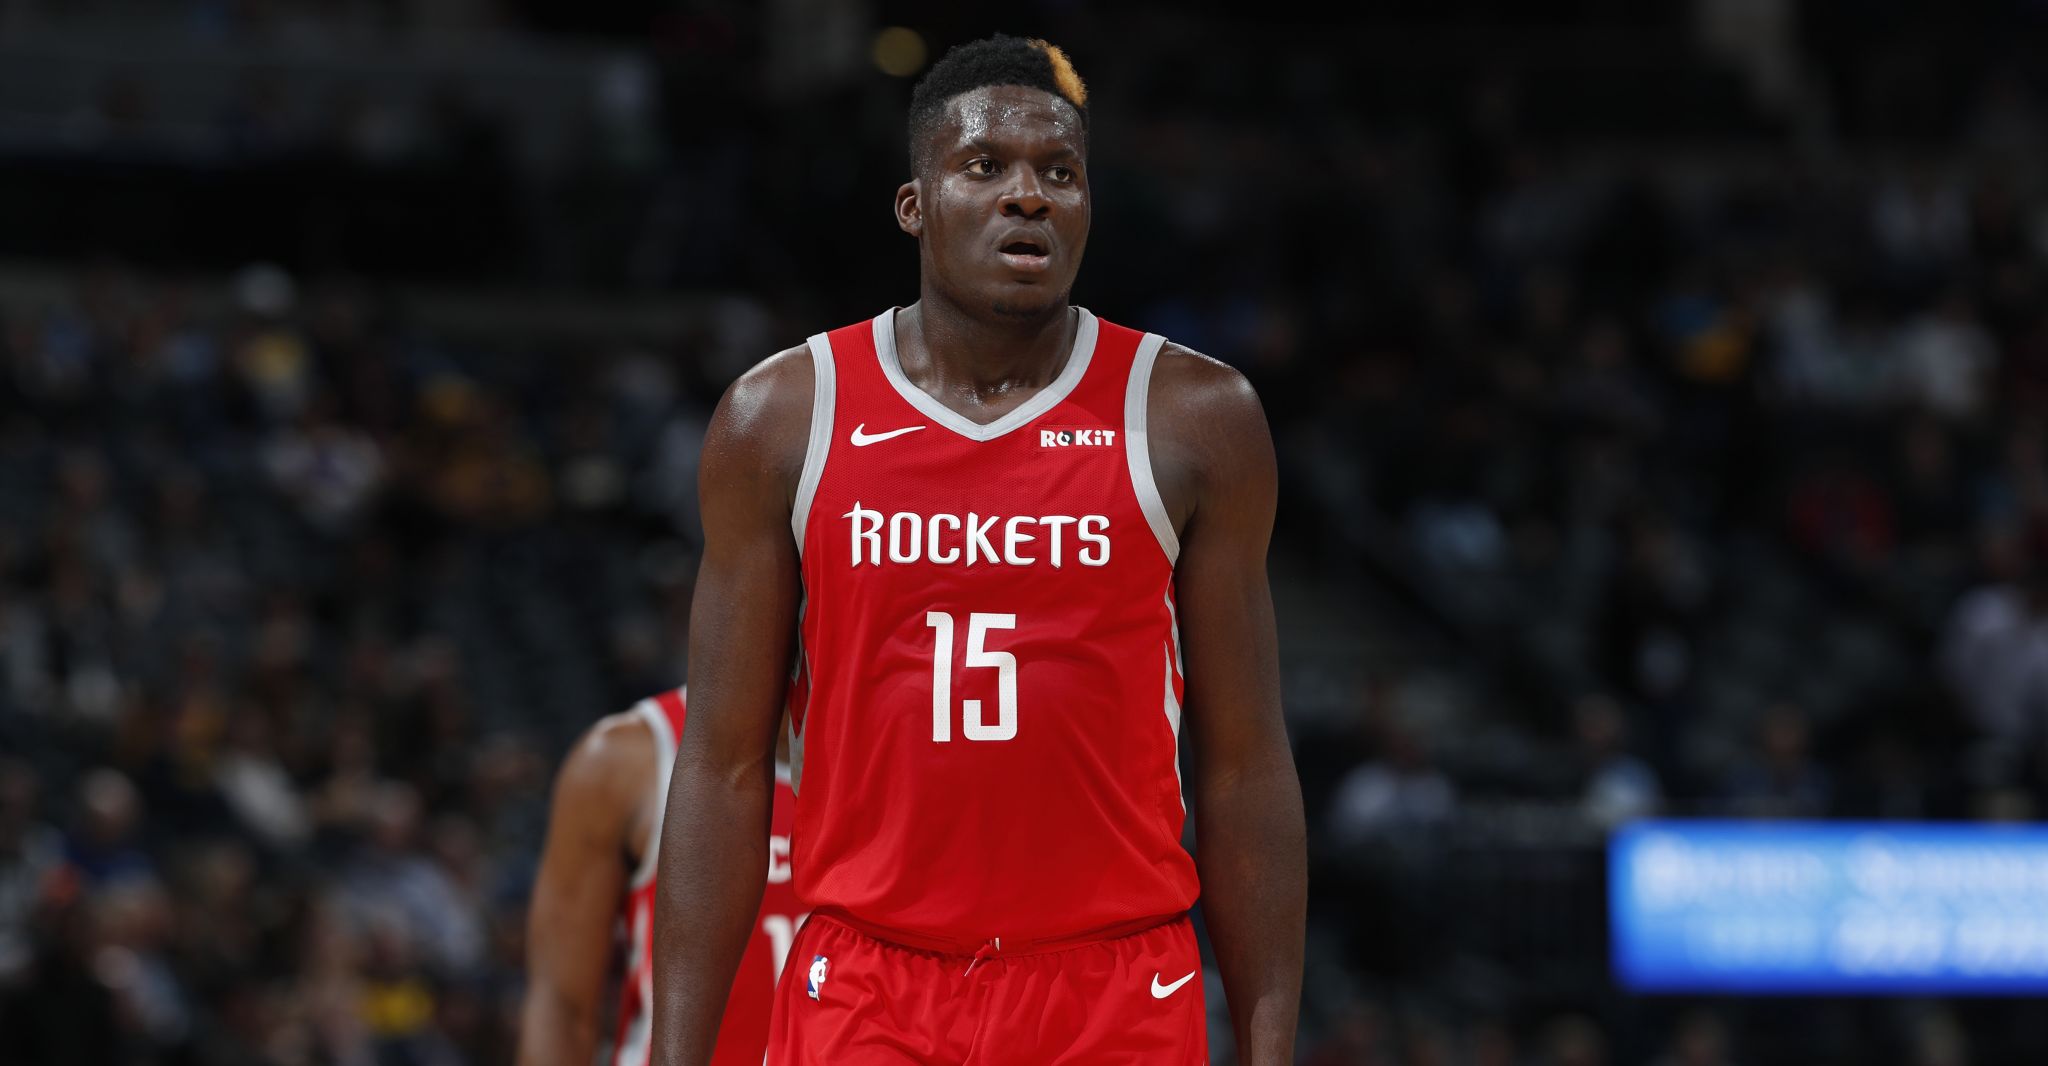 Rockets' Clint Capela out 4-6 weeks with thumb injury - HoustonChronicle.com